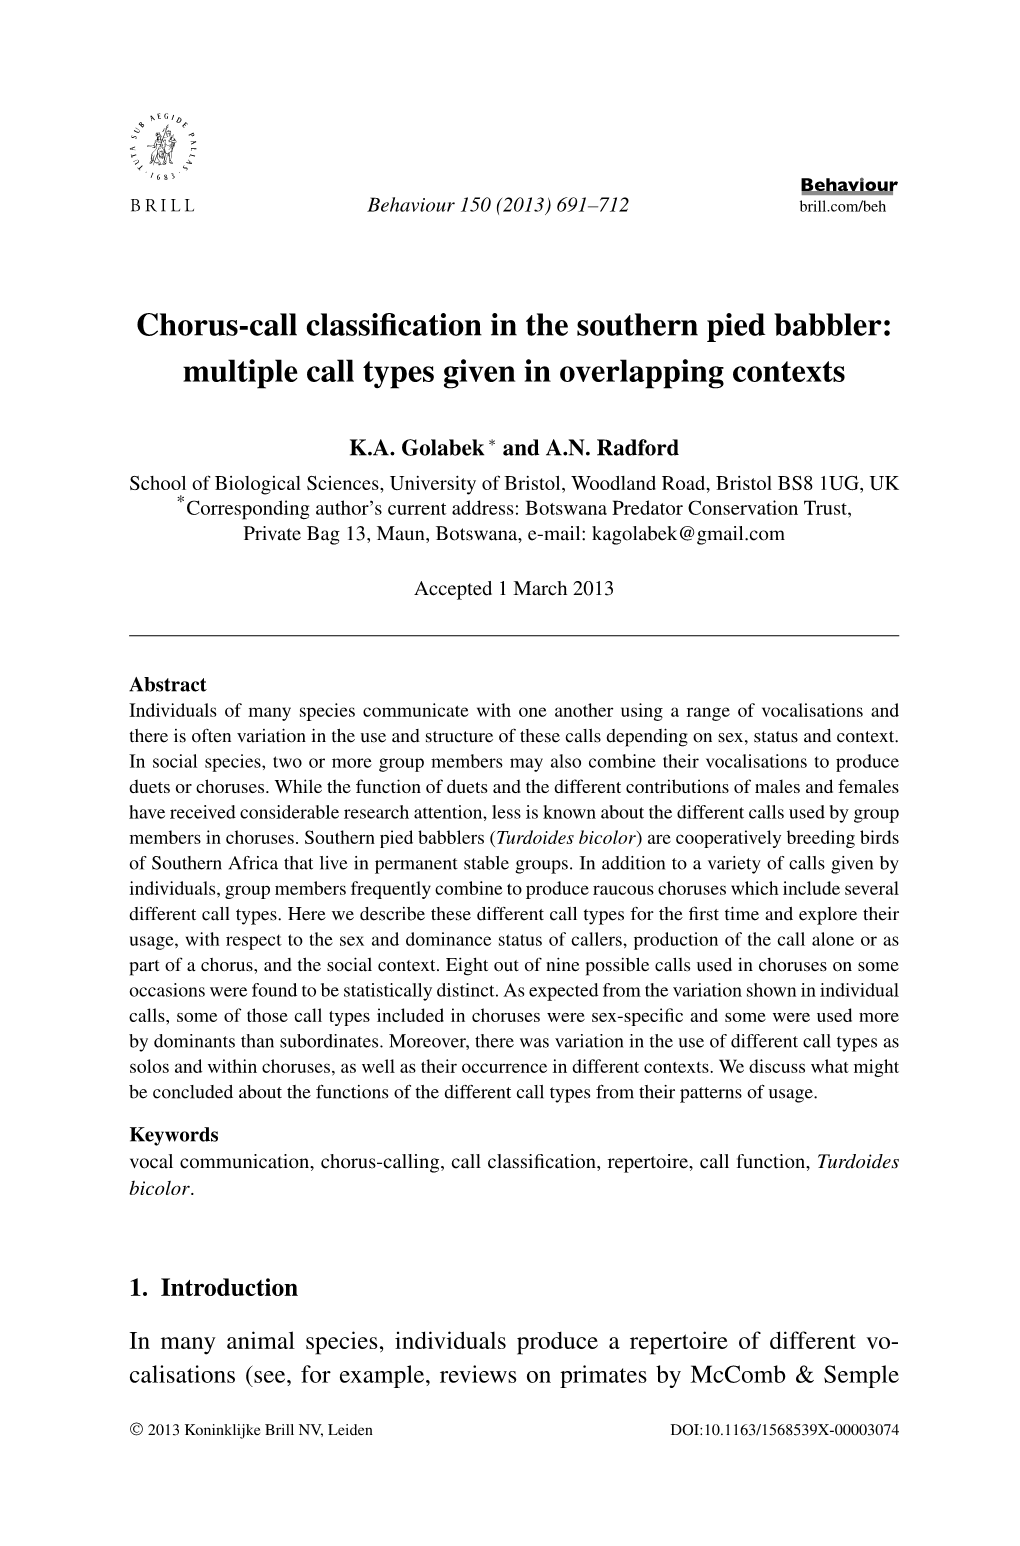 Chorus-Call Classification in the Southern Pied Babbler: Multiple Call